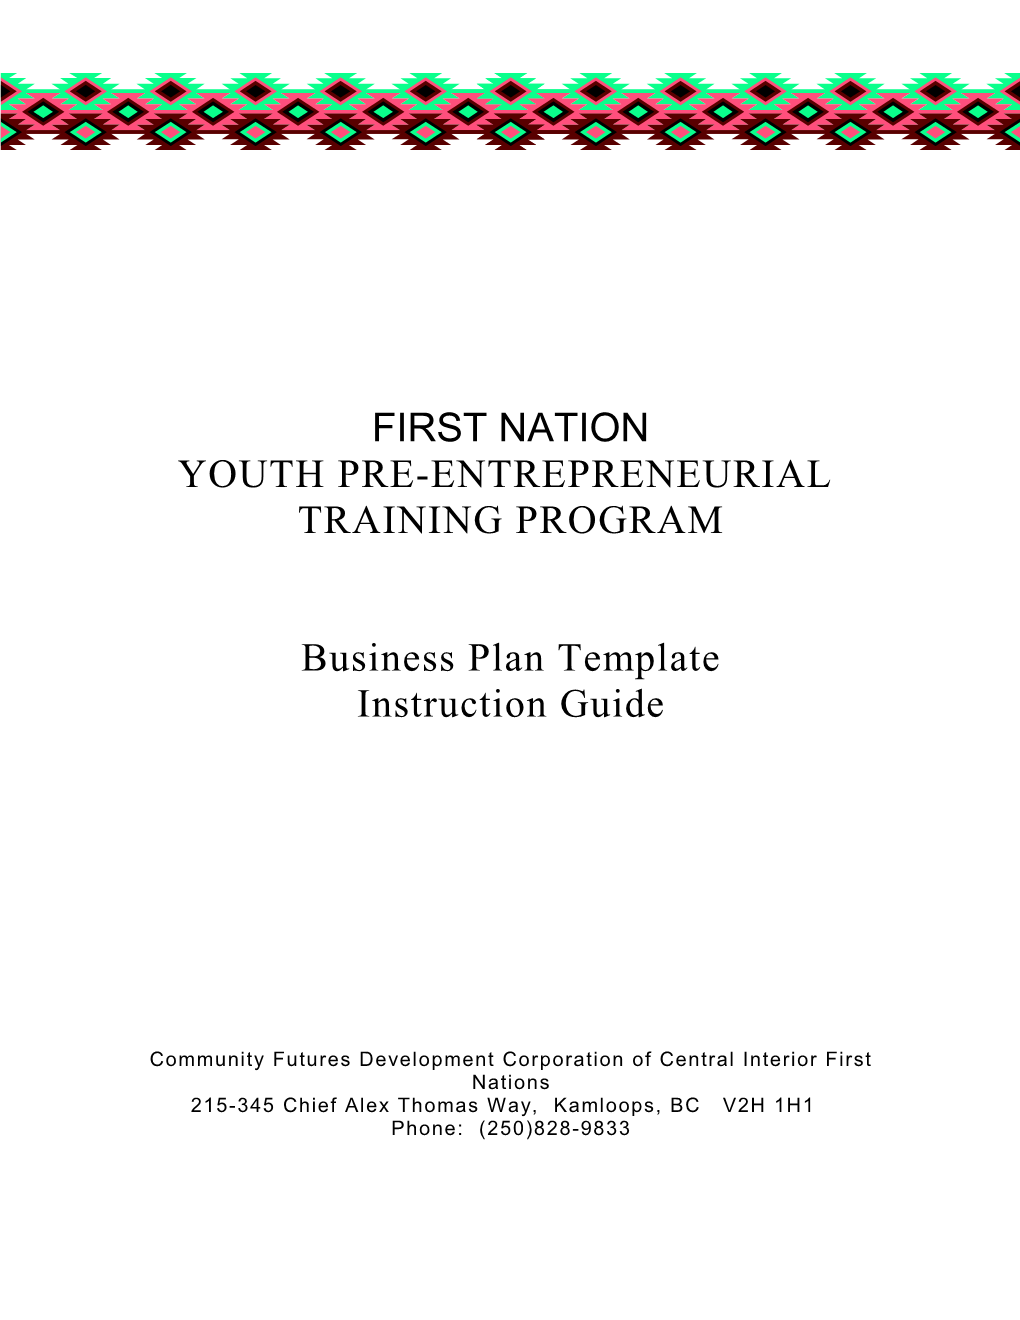 Instruction Guide for the Business Plan Templatepage1